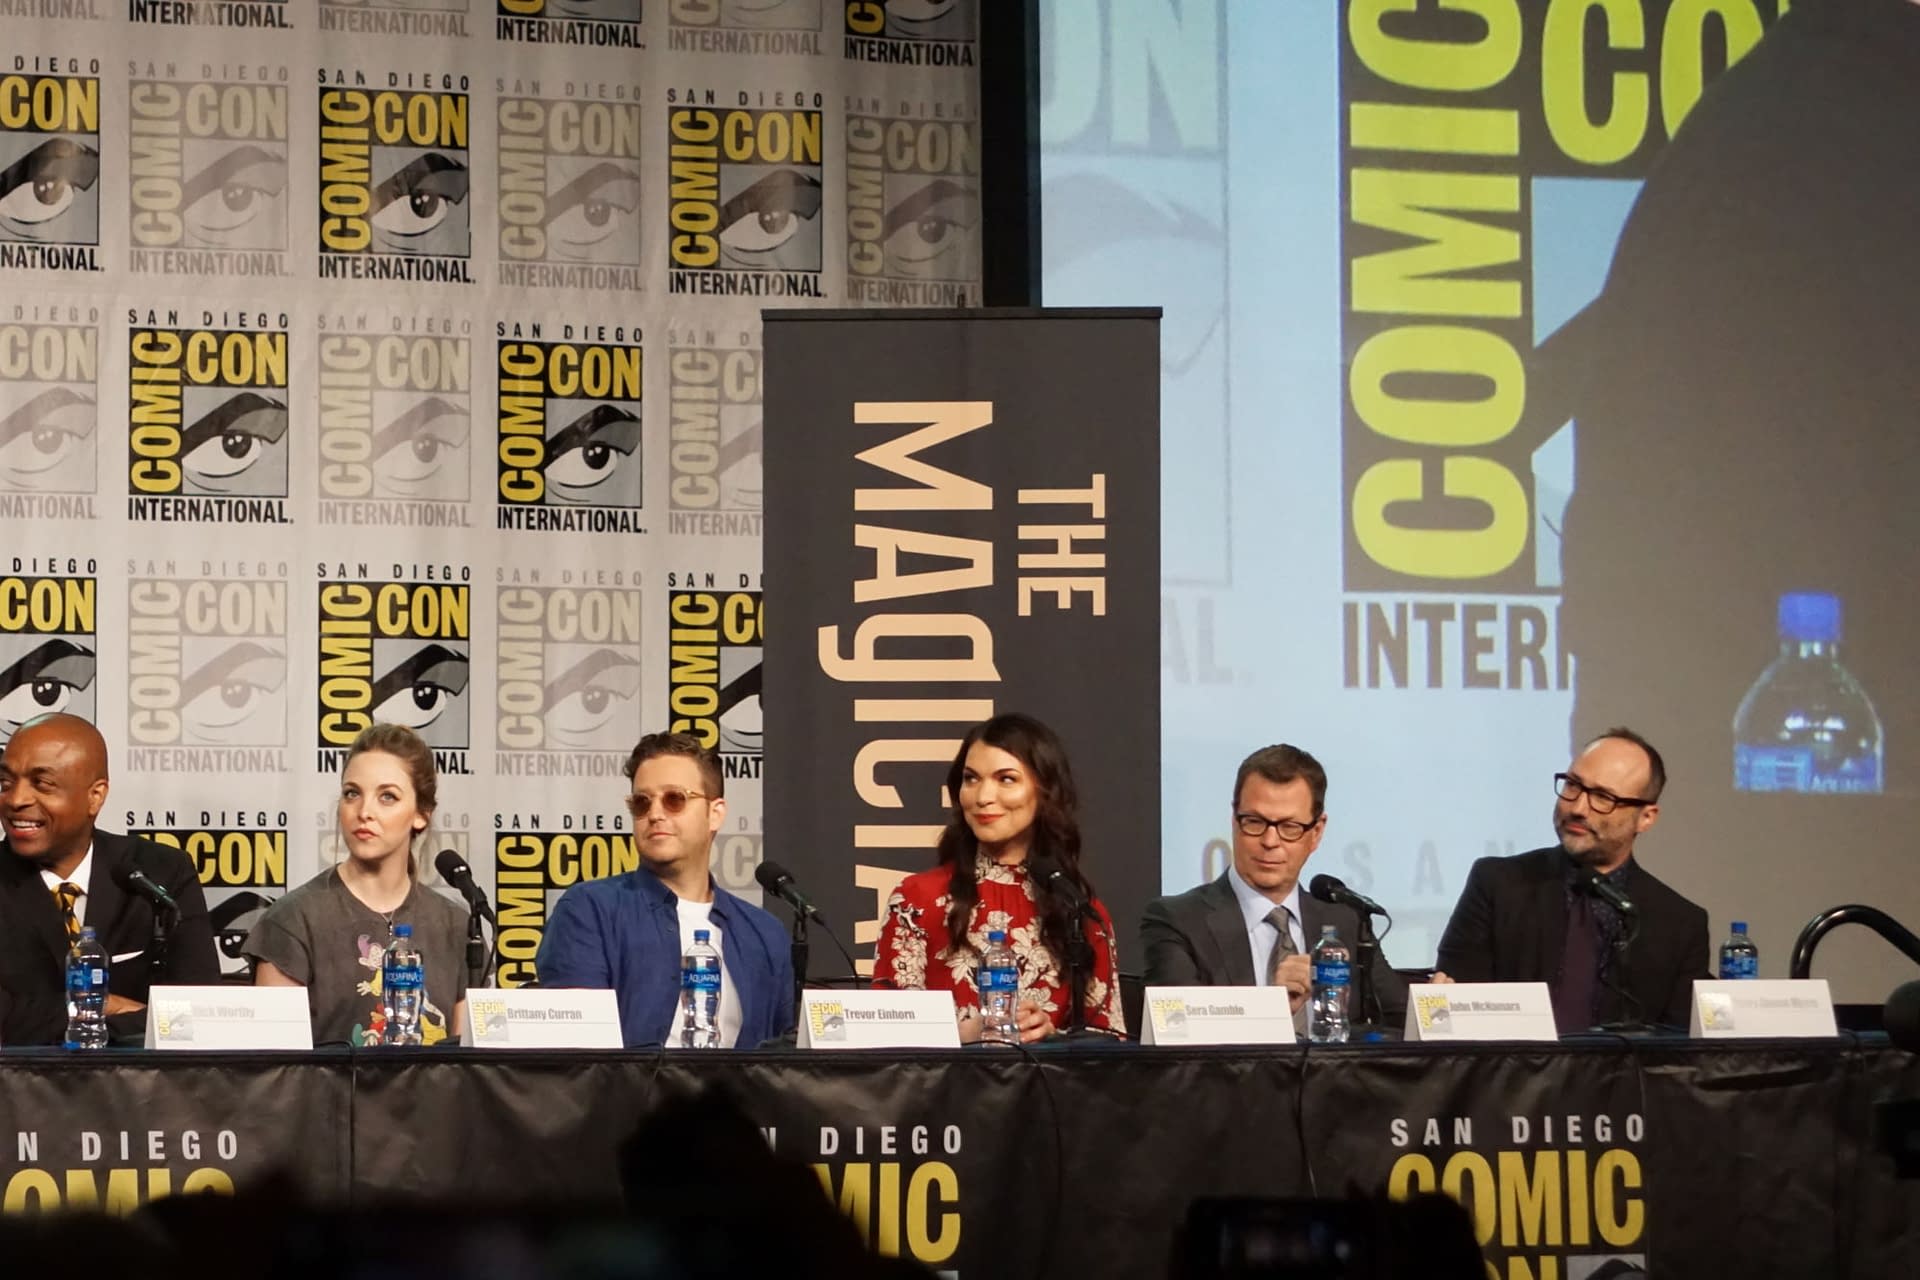 The Magicians SDCC 2019 Panel - With Some MST3K Commentary Thrown In